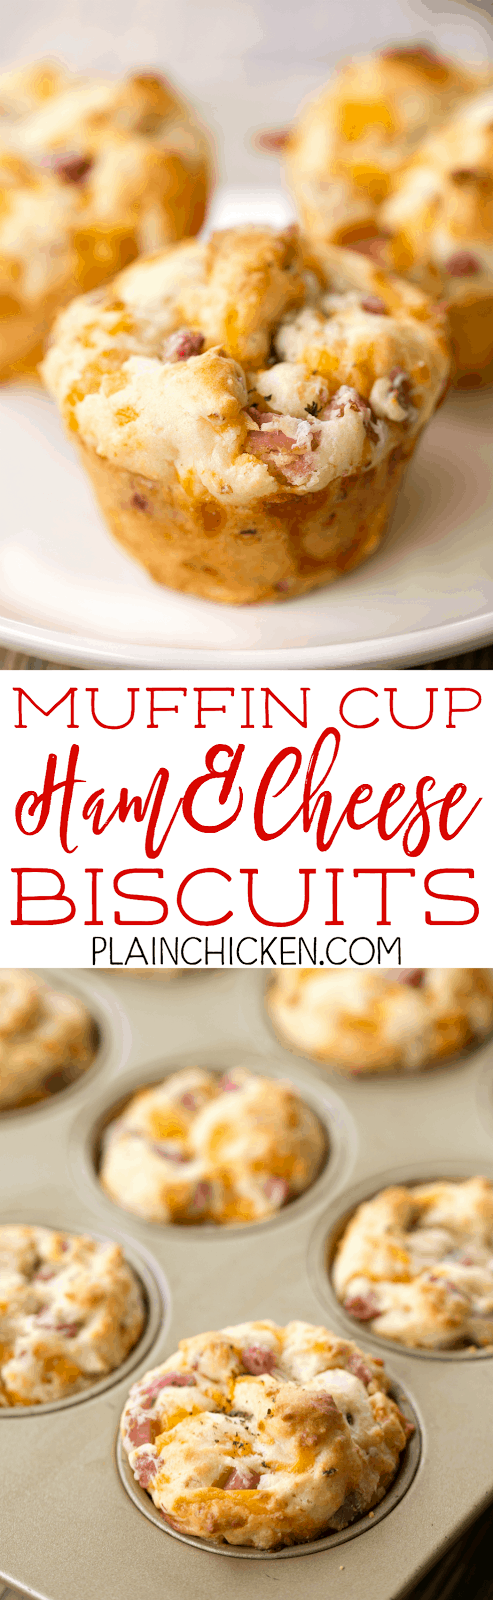 Muffin Cup Ham and Cheese Biscuits - SO GOOD! Great for breakfast, lunch or dinner. Make in a mini muffin pan for parties. There are never any left!! Flour, baking powder, salt, mayonnaise, ham and cheese. Ready in under 15 minutes!